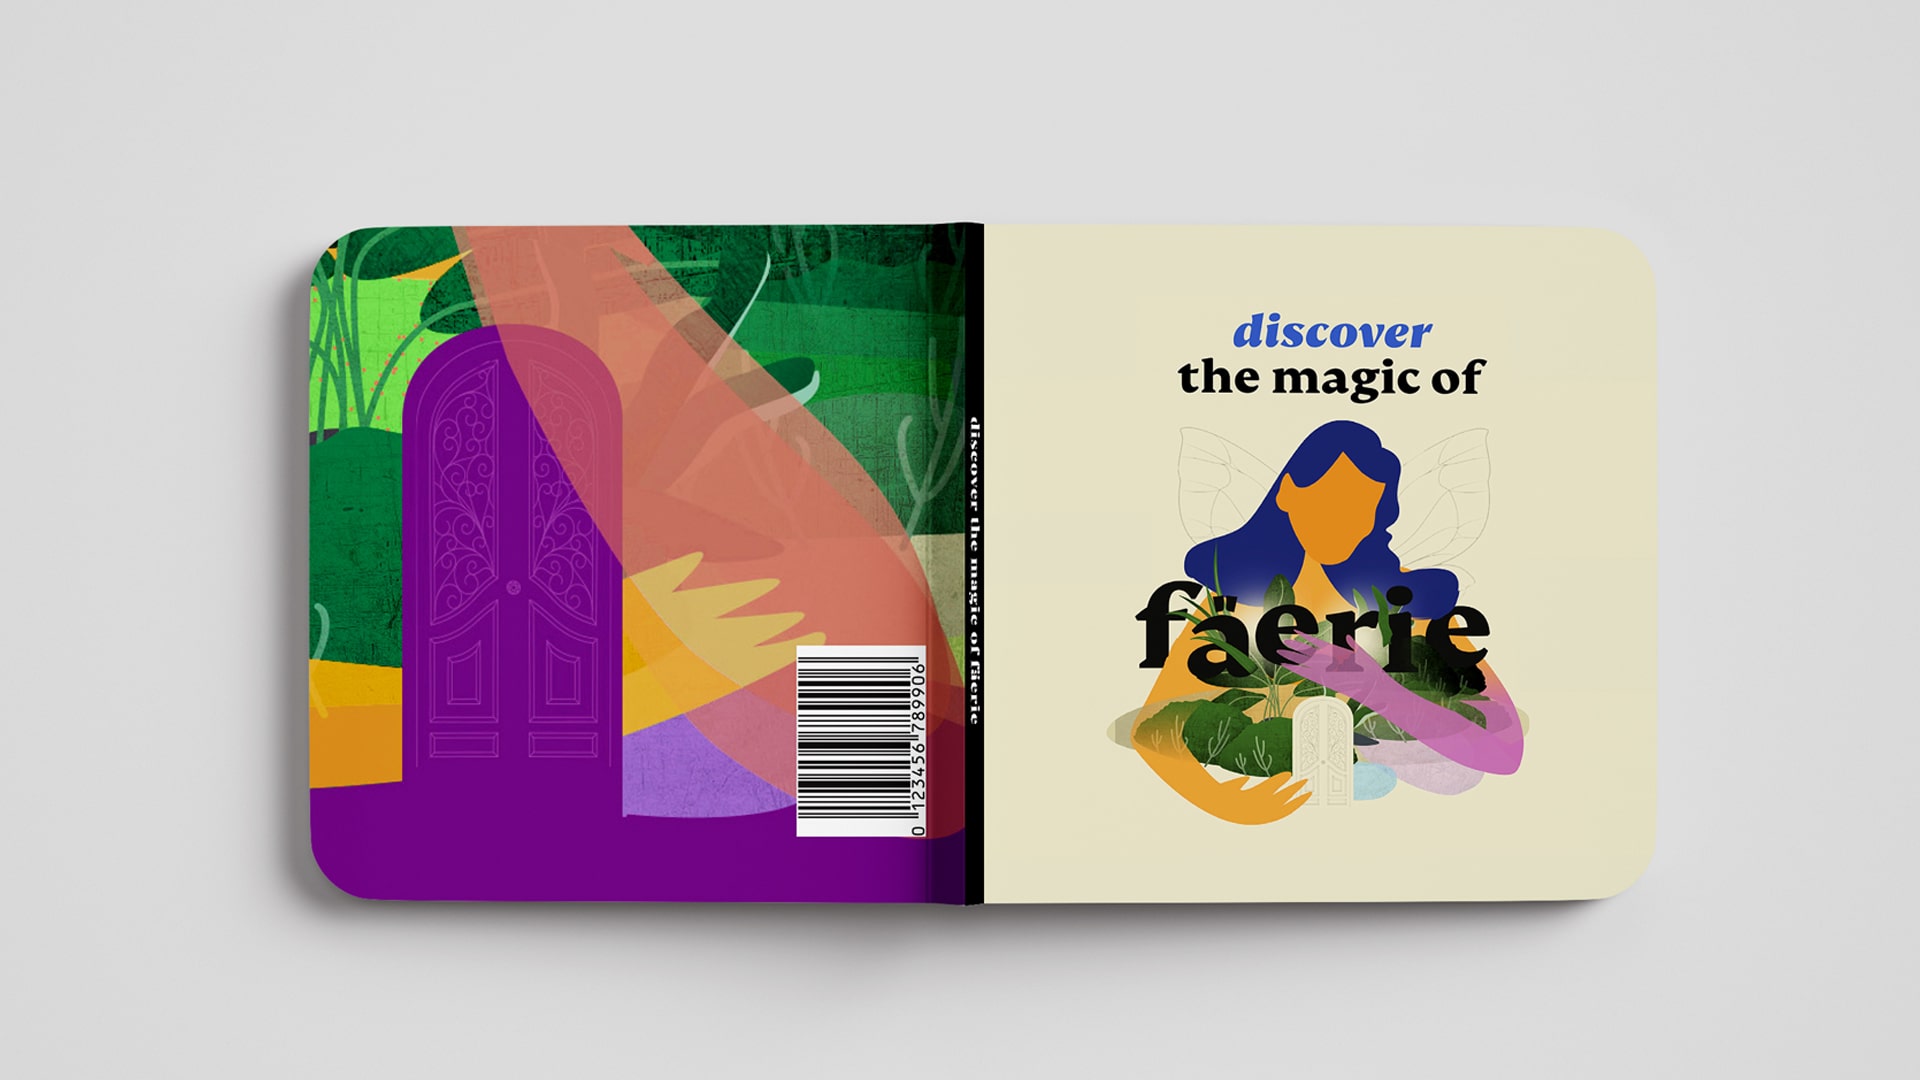 An image of a book cover design displaying the Faerie branding consisting of a fairy wrapping her arms around a natural mythical world and displaying the words 'Discover the magic of Faerie'